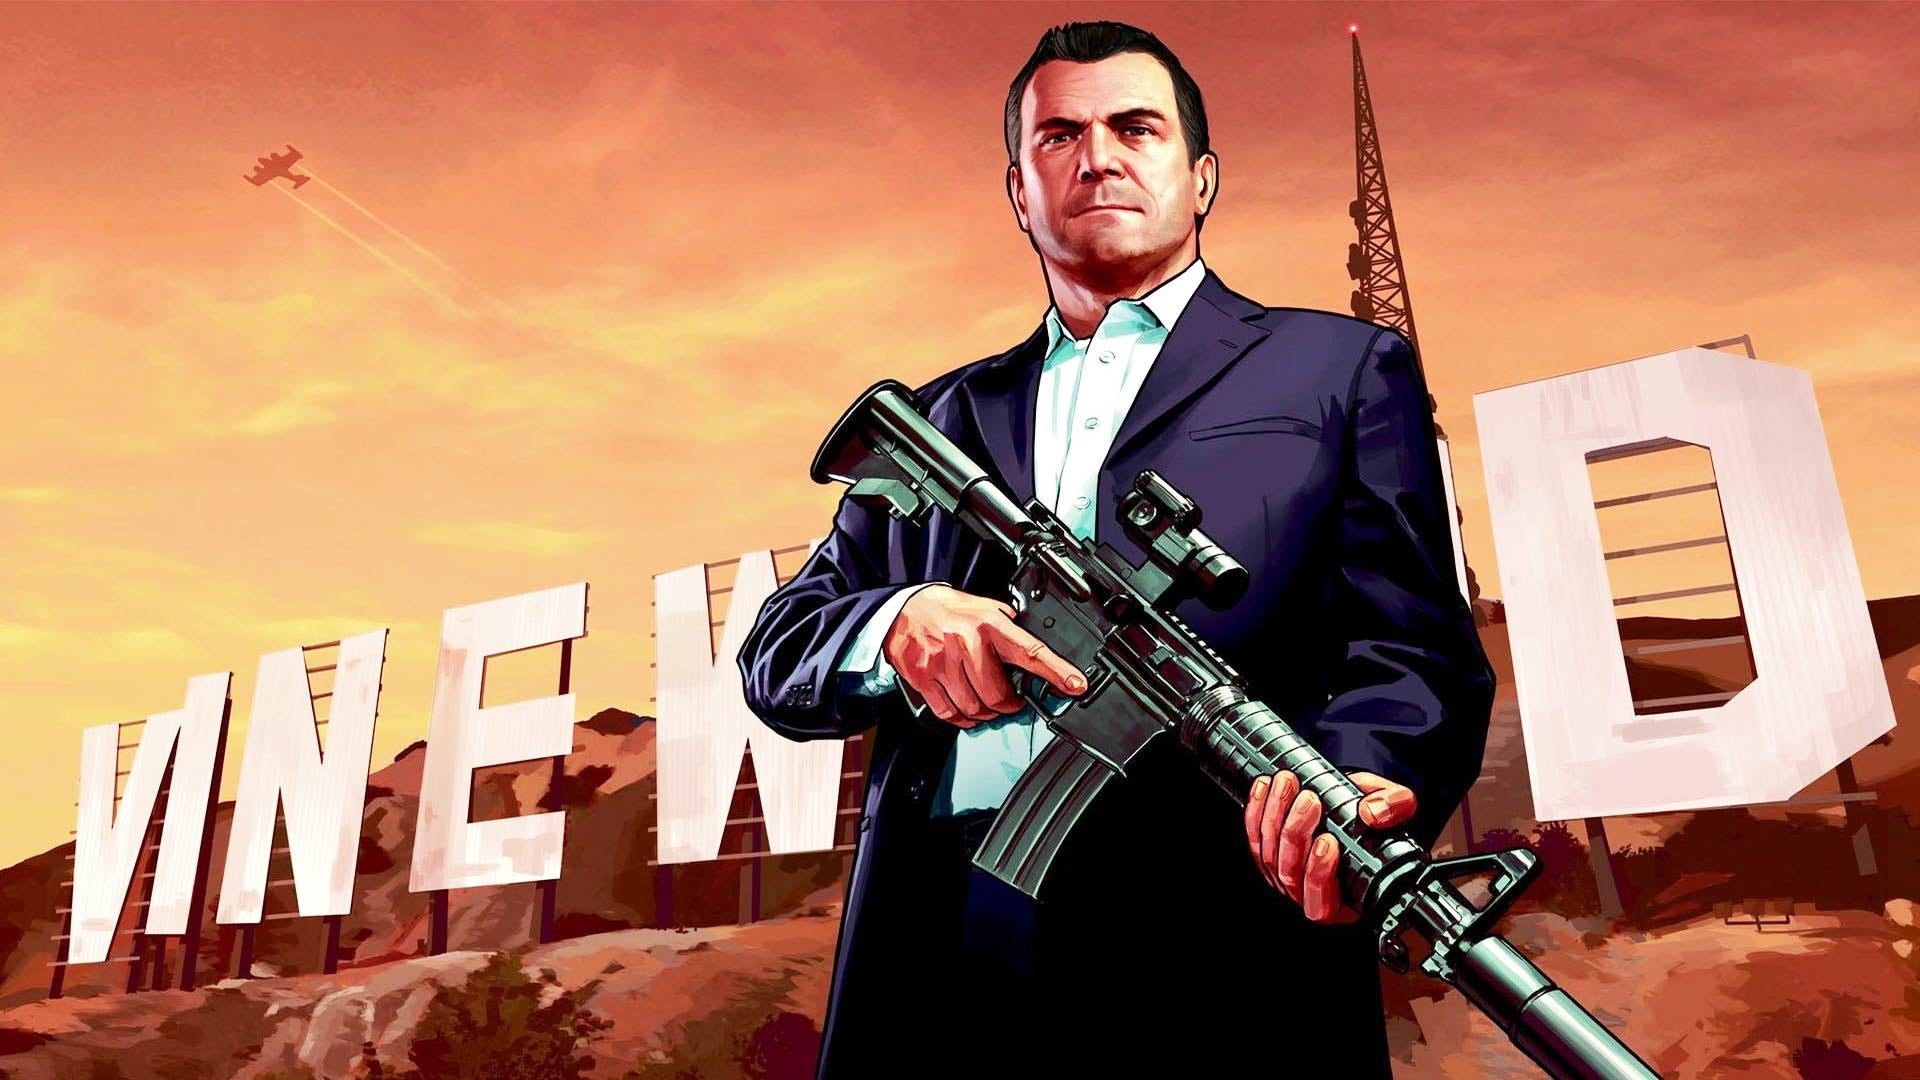 GTA Online's new DLC confirms that Michael is still alive after the GTA 5 story.